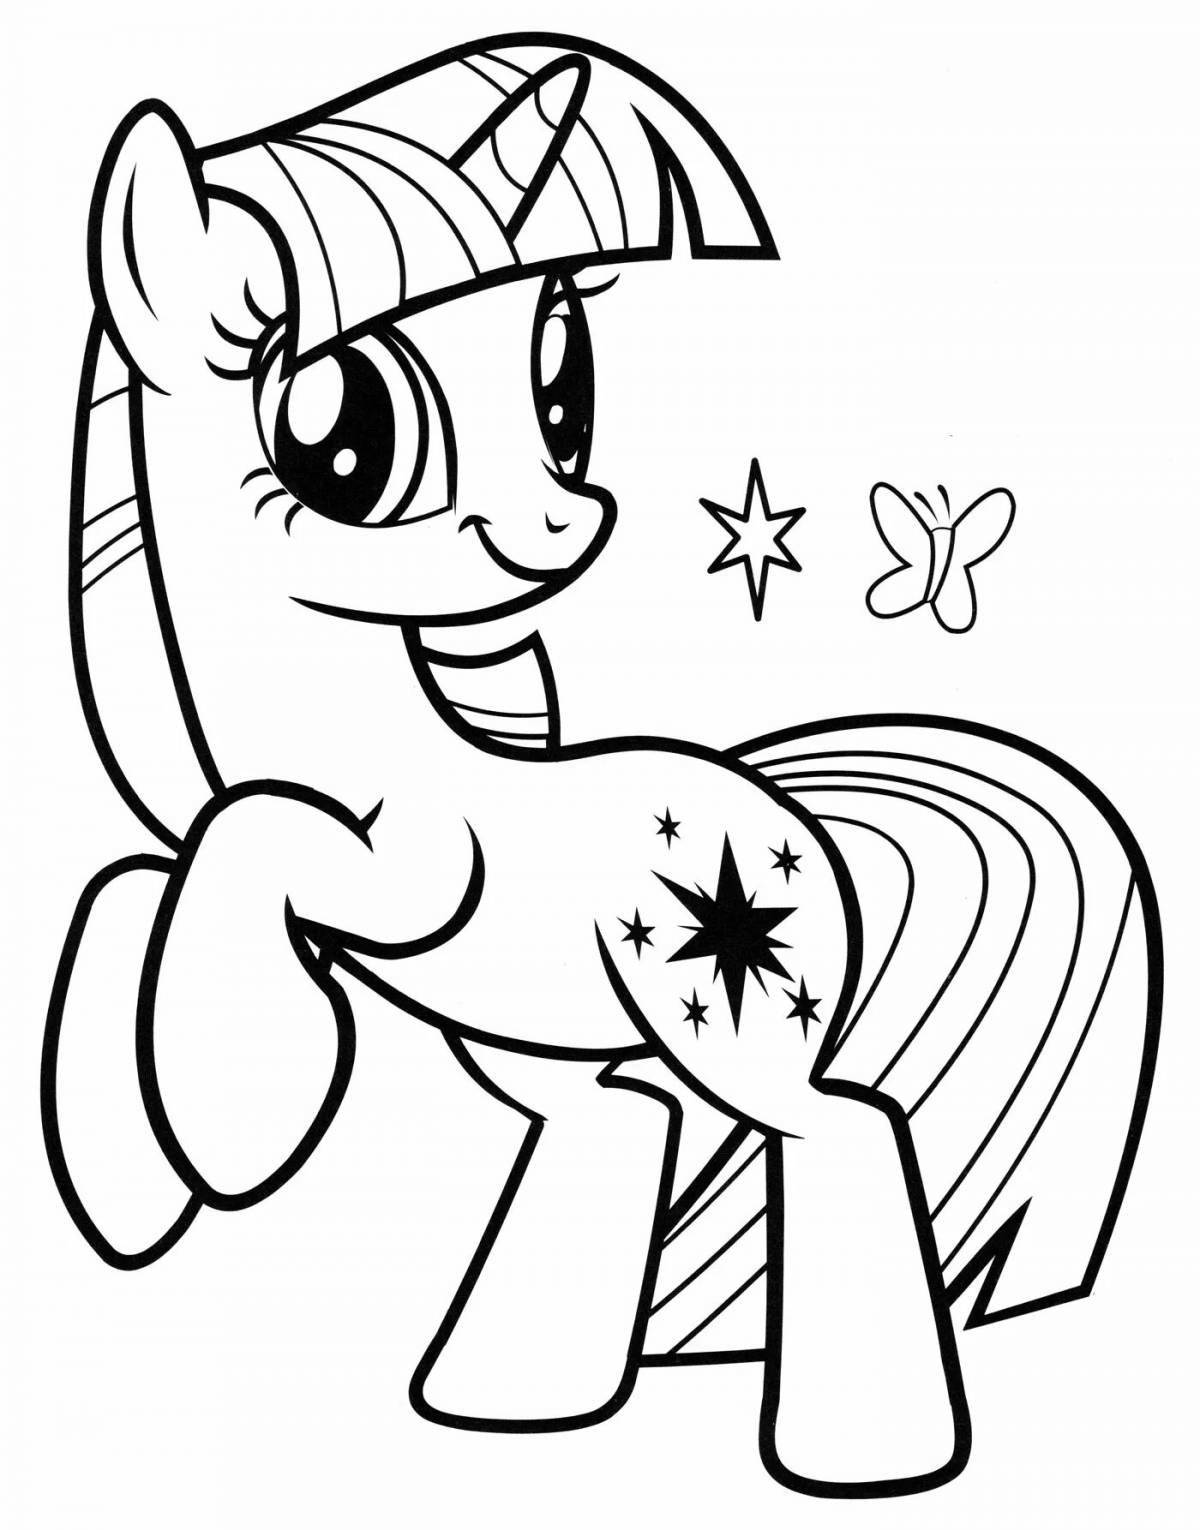 Coloring book glowing pony